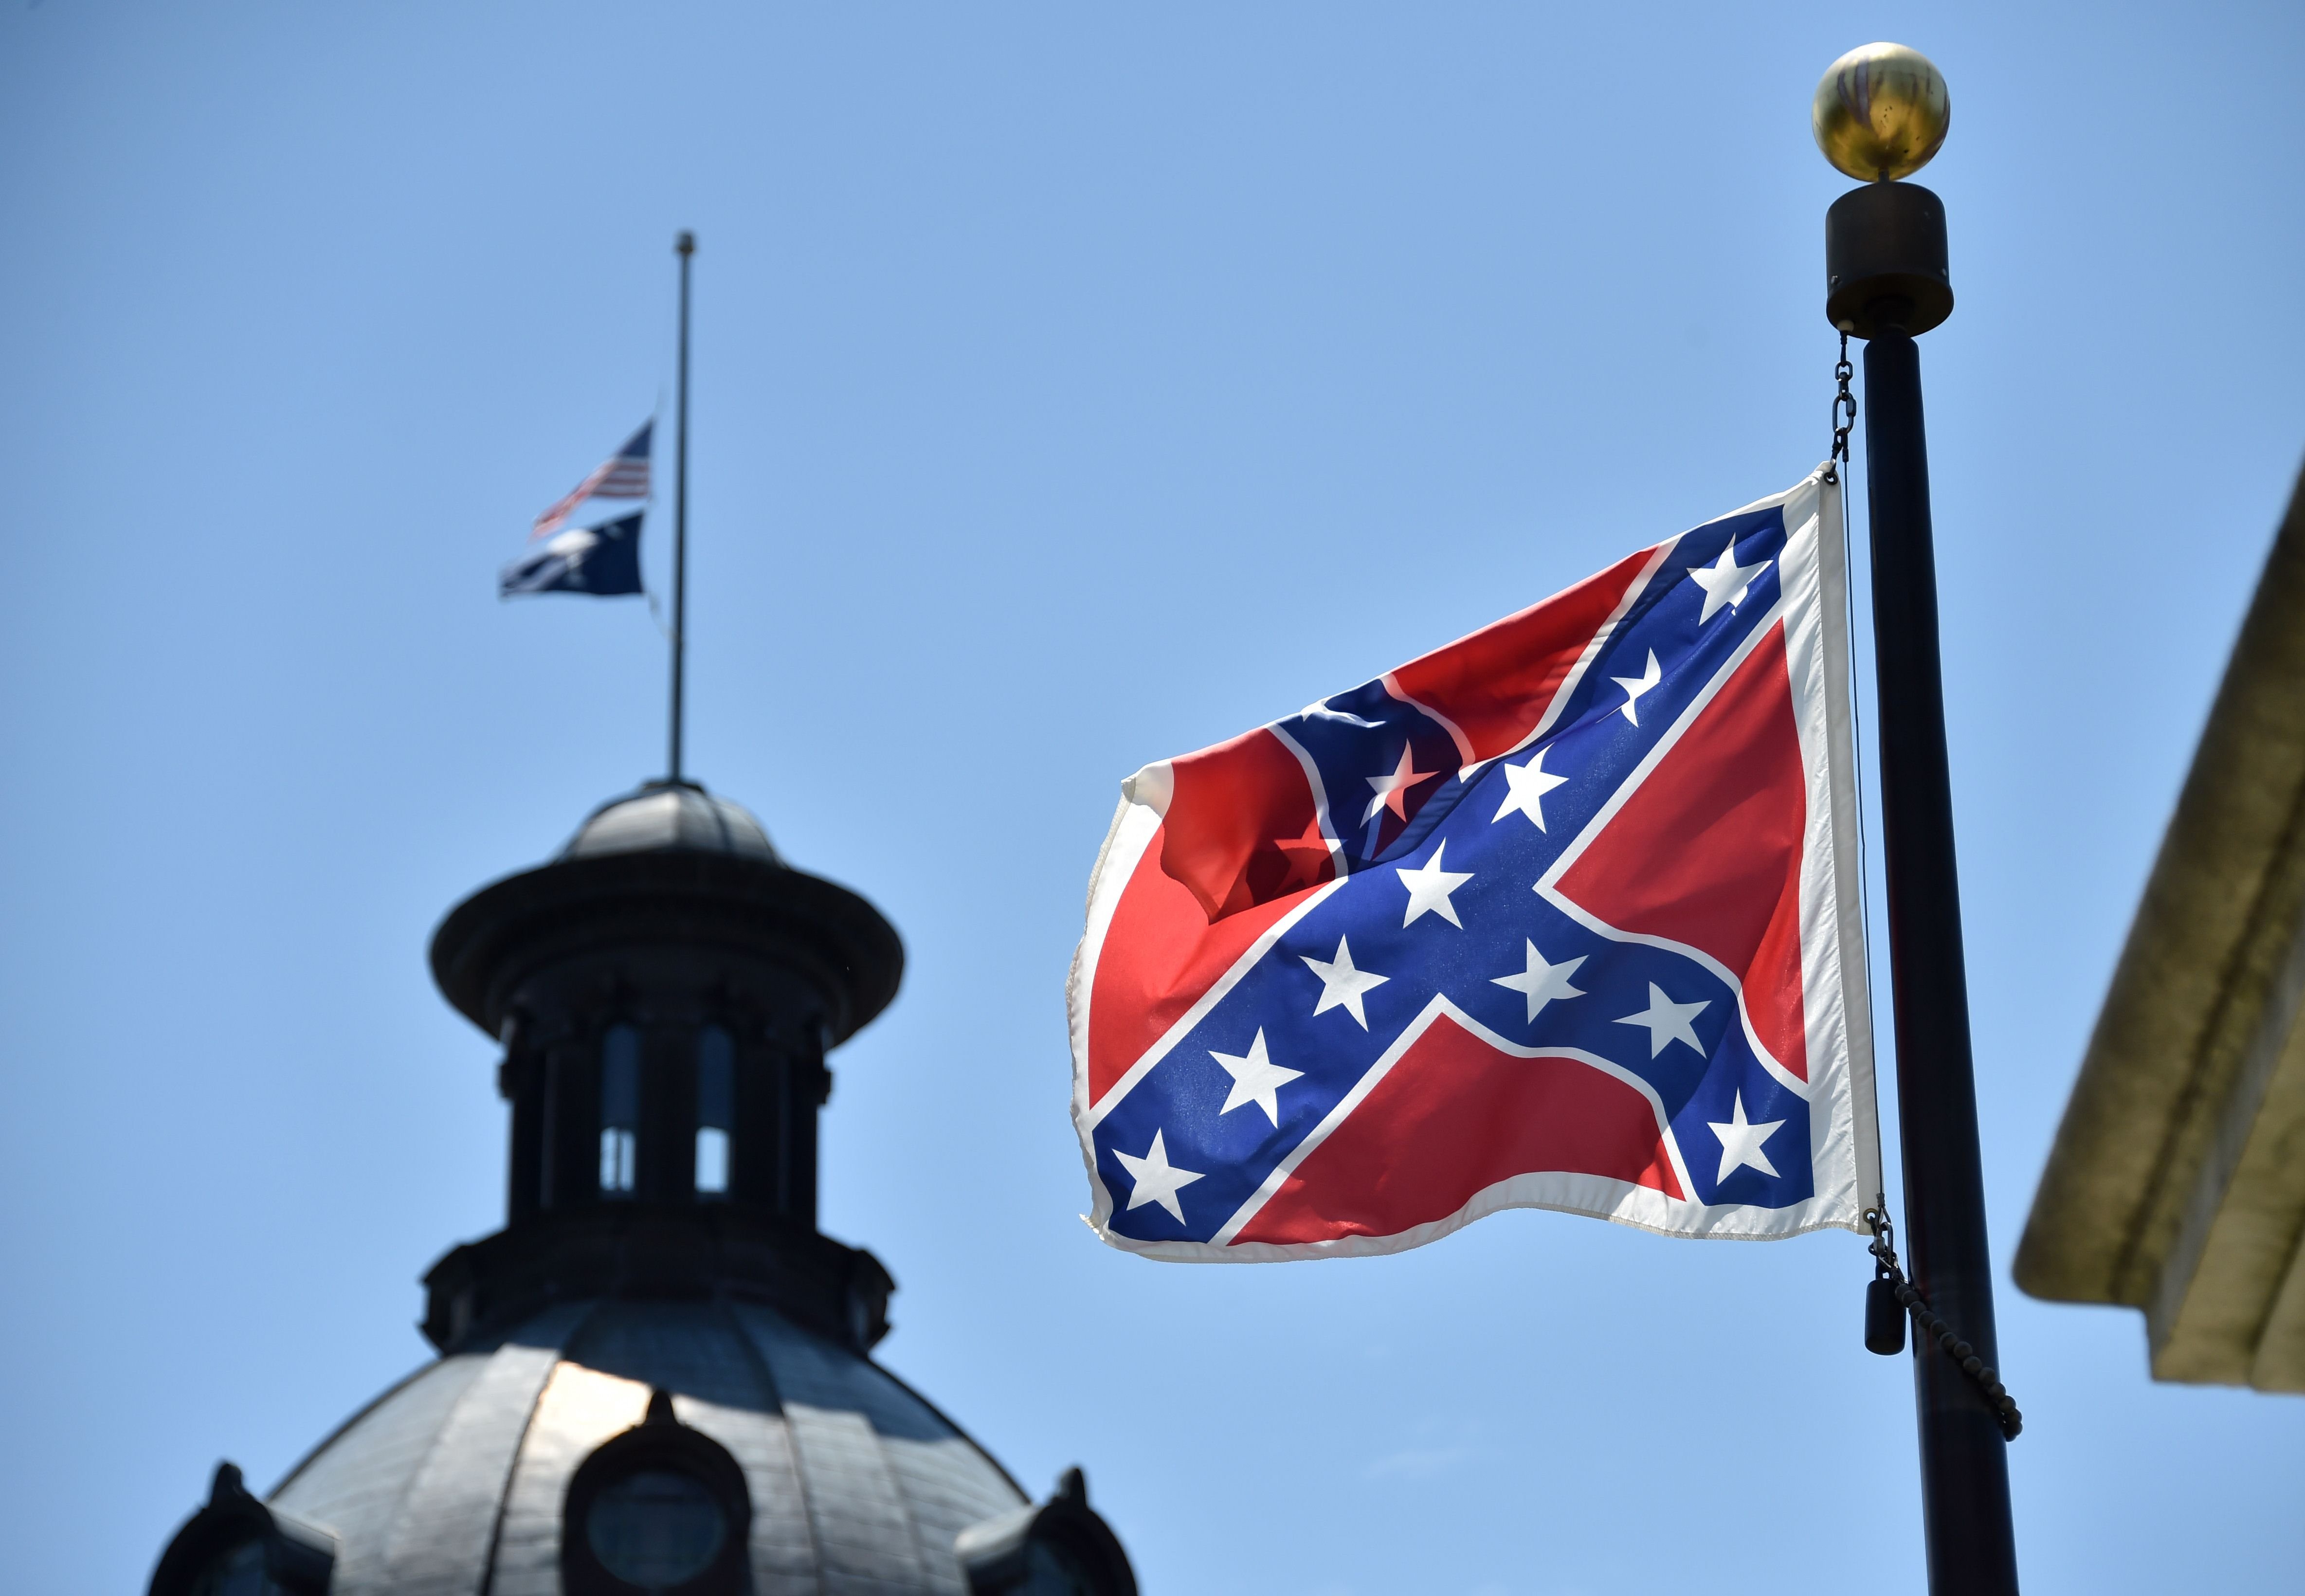 The South Carolina and US  flags are seen flying at half-staff behind the Confederate flag erected in front of the State Congress building in Columbia, South Carolina on June 19, 2015. (Mladen Antonov—AFP/Getty Images)